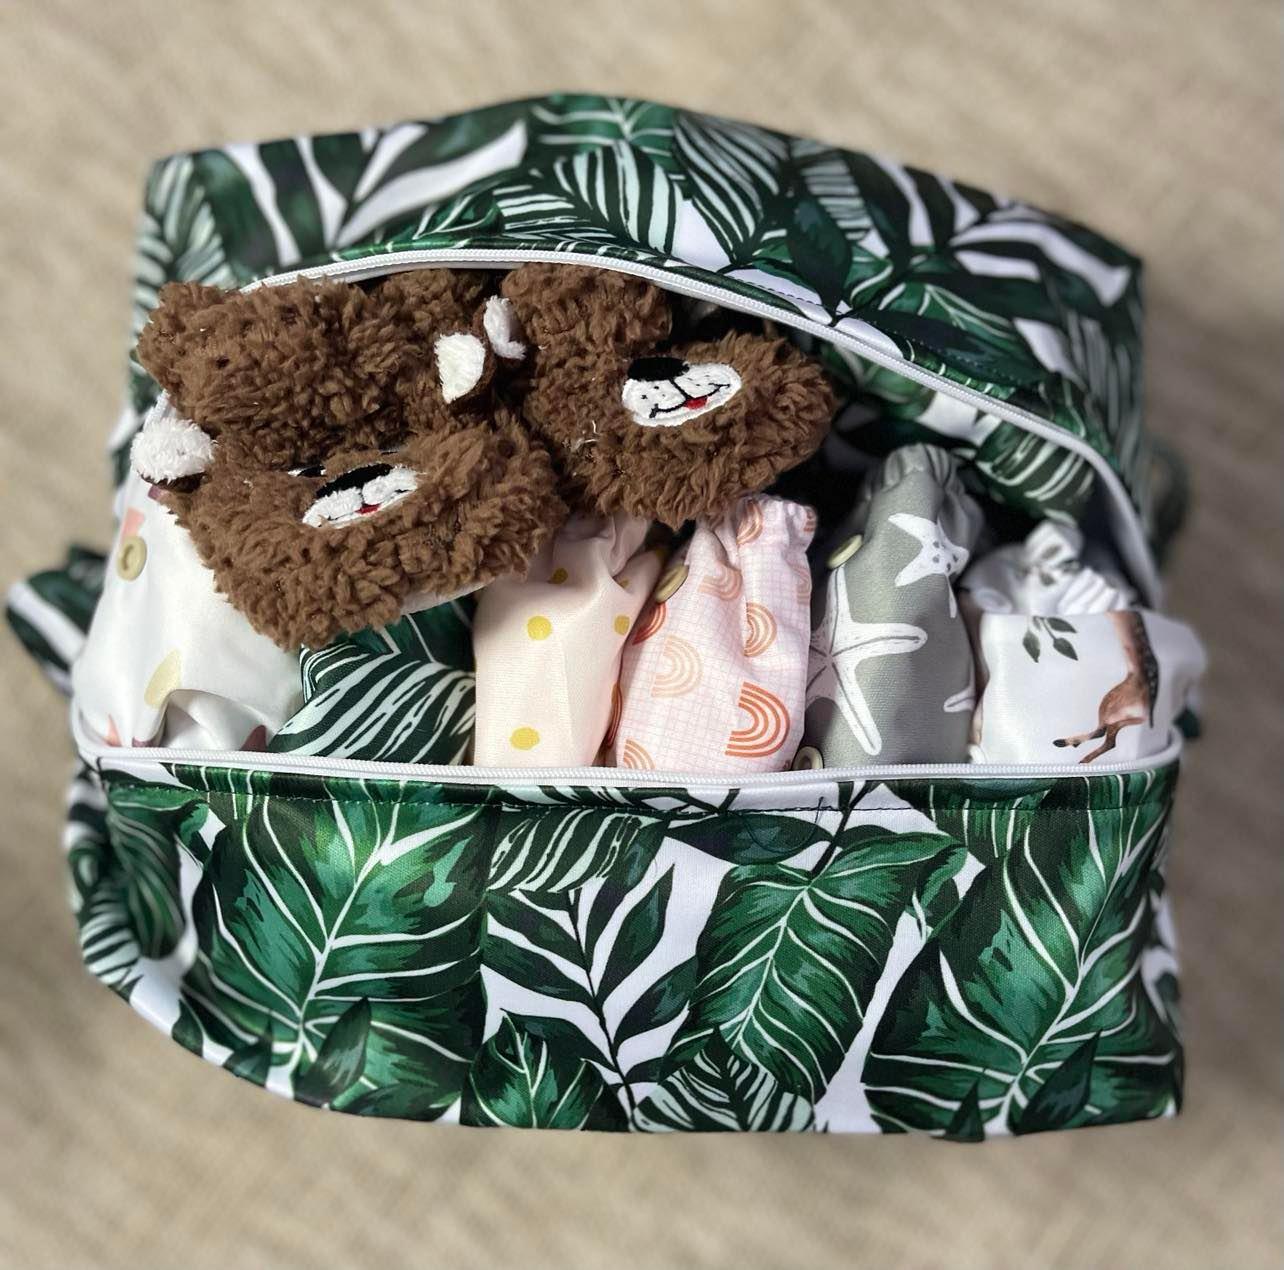 Yoho Baby & co. Explorer Travel Nappy Bags/Pods NZ. Reusable Storage Bags for Nappies. Palm Beach Print